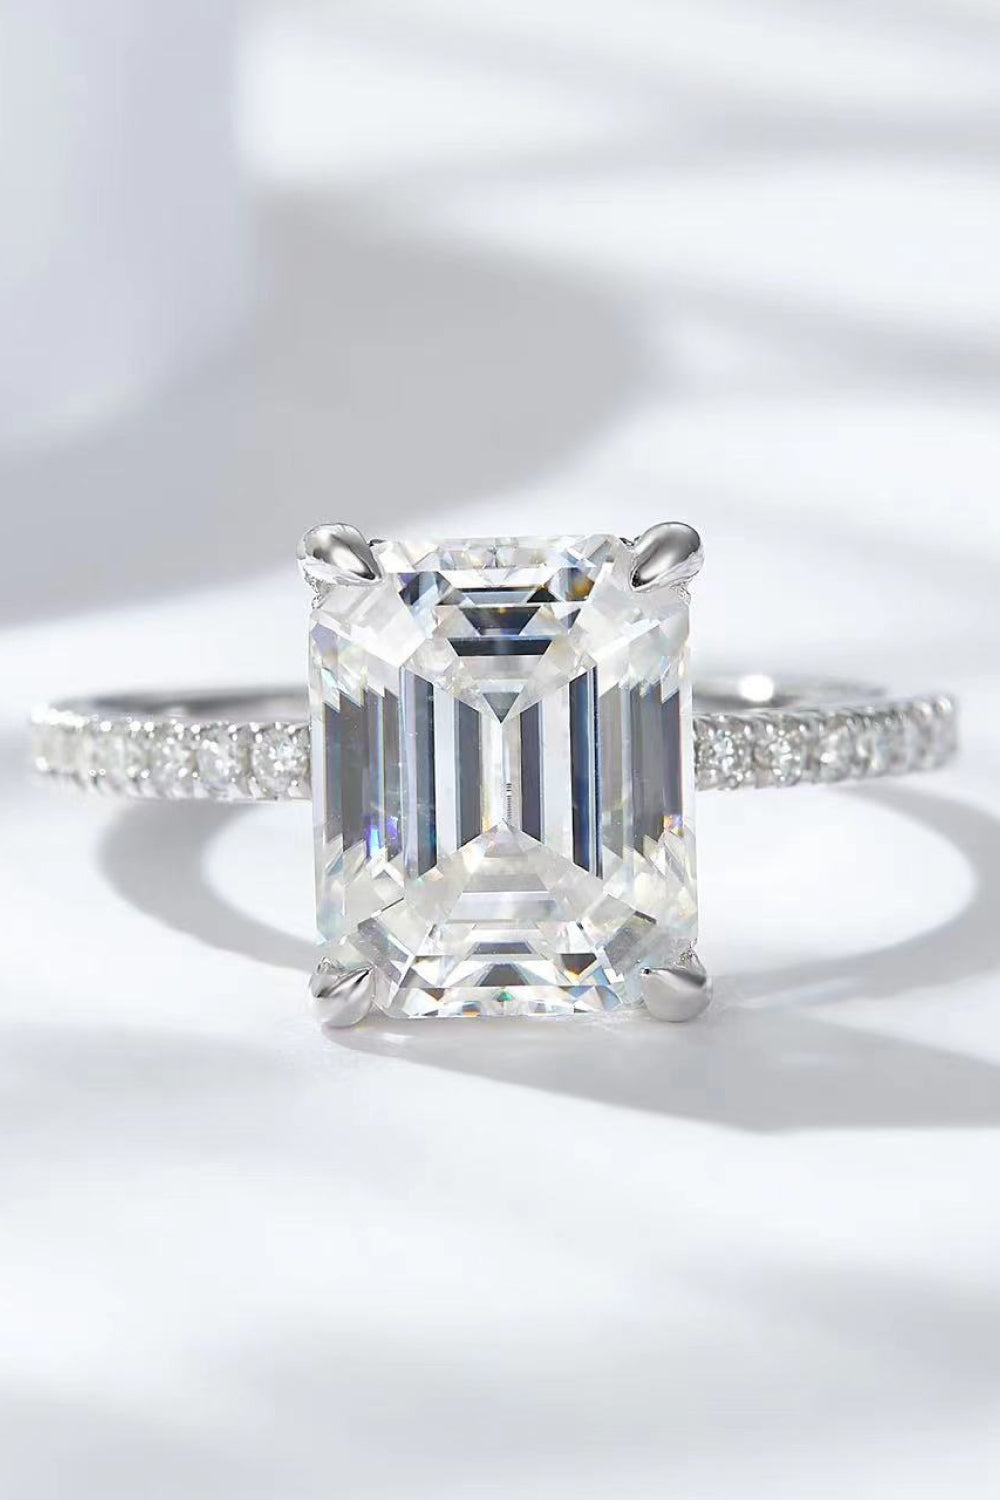 Emerald Cut Engagement Ring 5 Carat Moissanite Side Stone Cocktail Ring